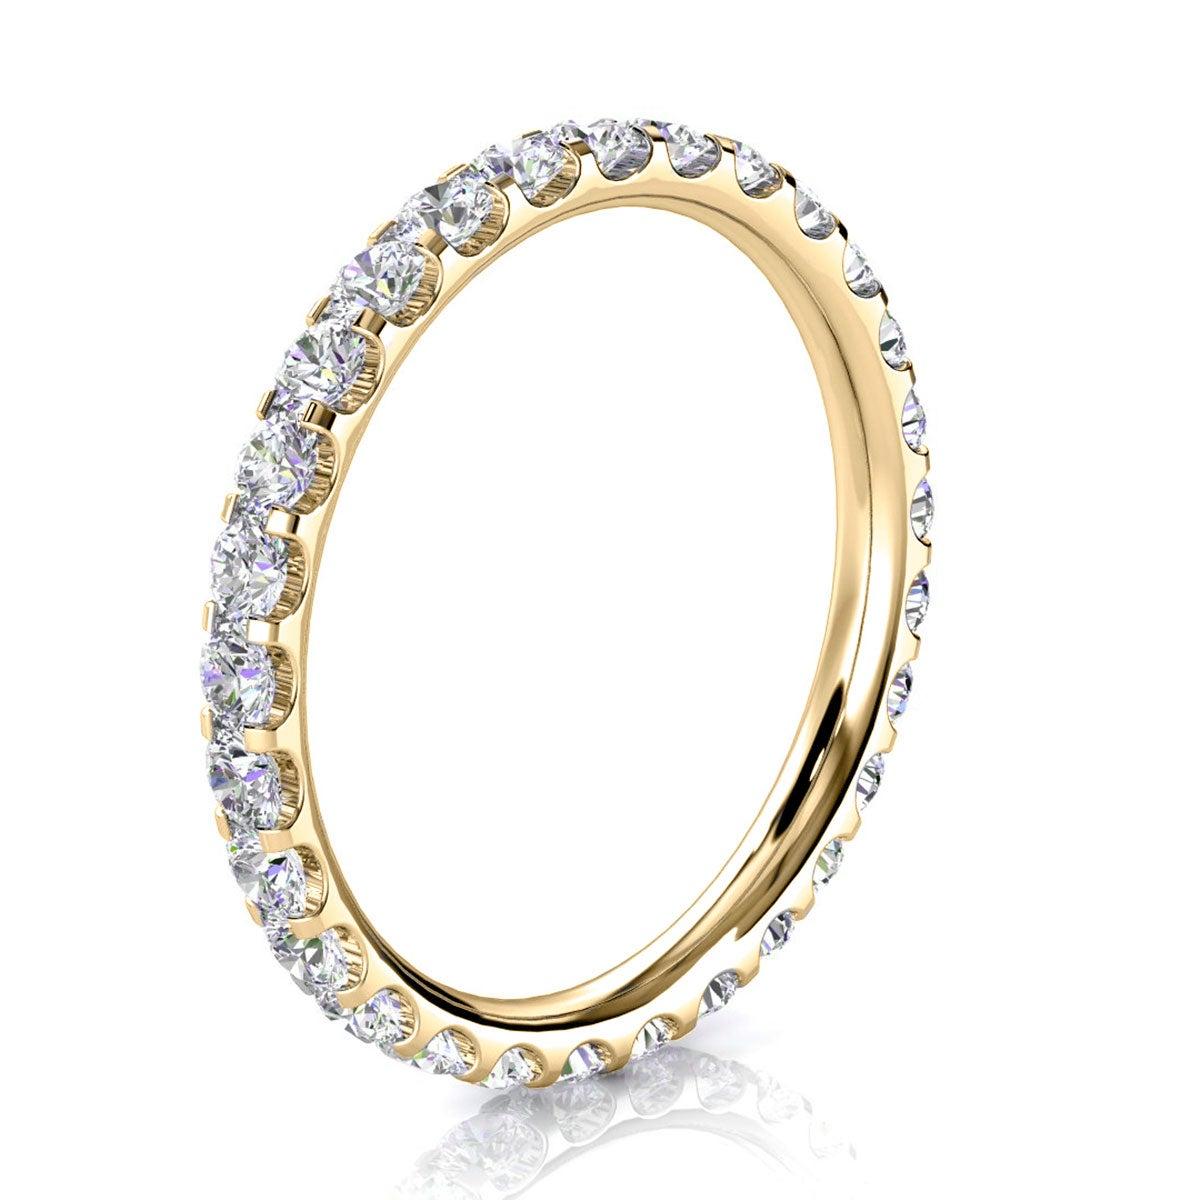 For Sale:  18k Yellow Gold Viola Eternity Micro-Prong Diamond Ring '3/4 Ct. Tw' 2